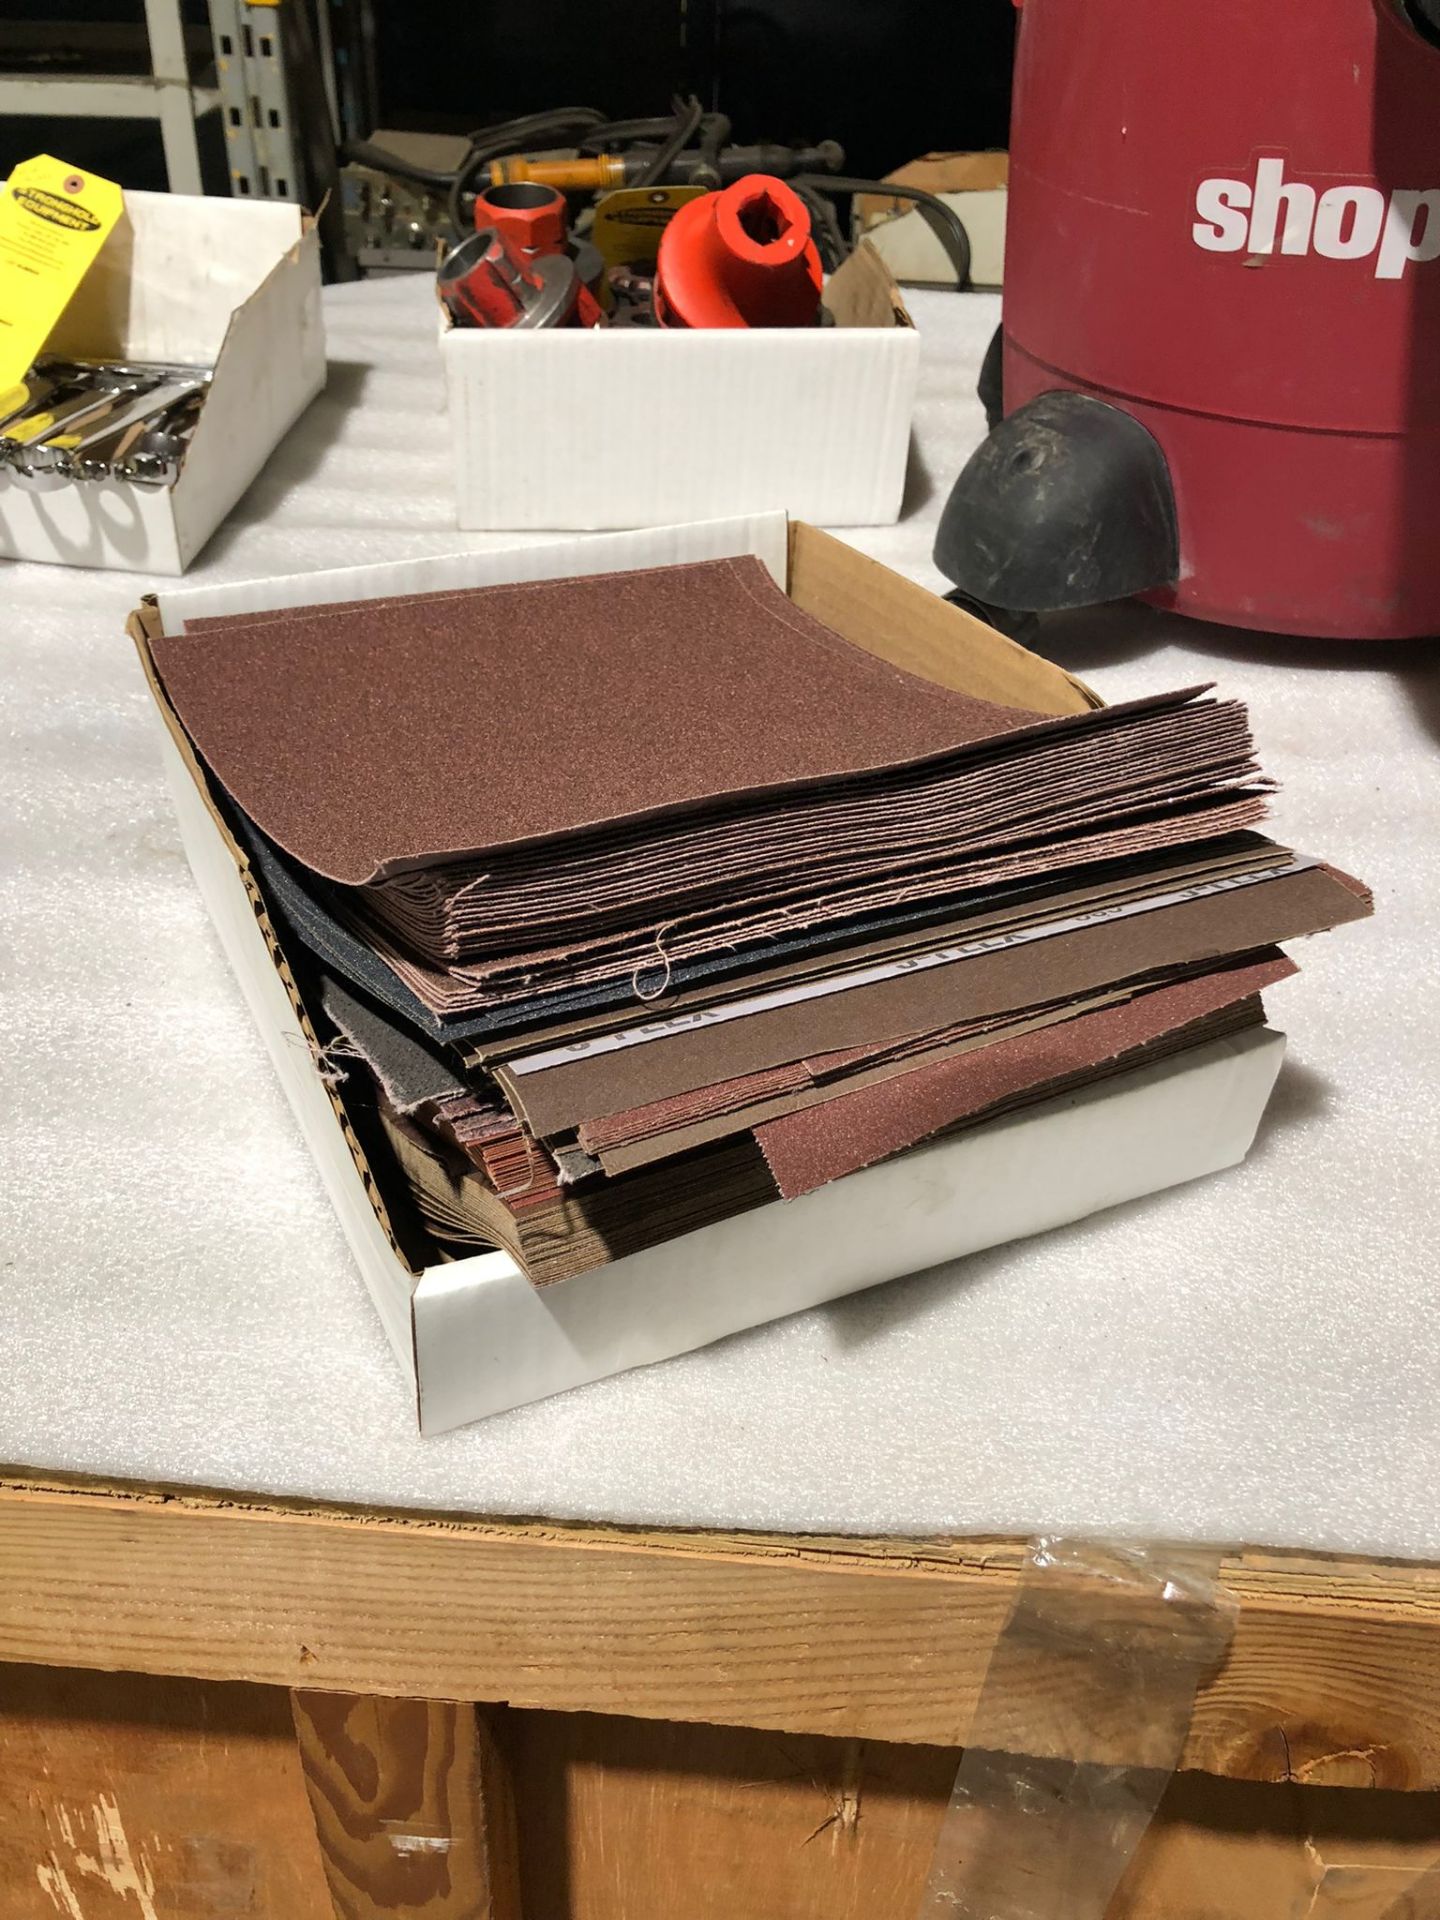 Lot of Sand Paper units - Approximately 100 Sheets - Image 2 of 2